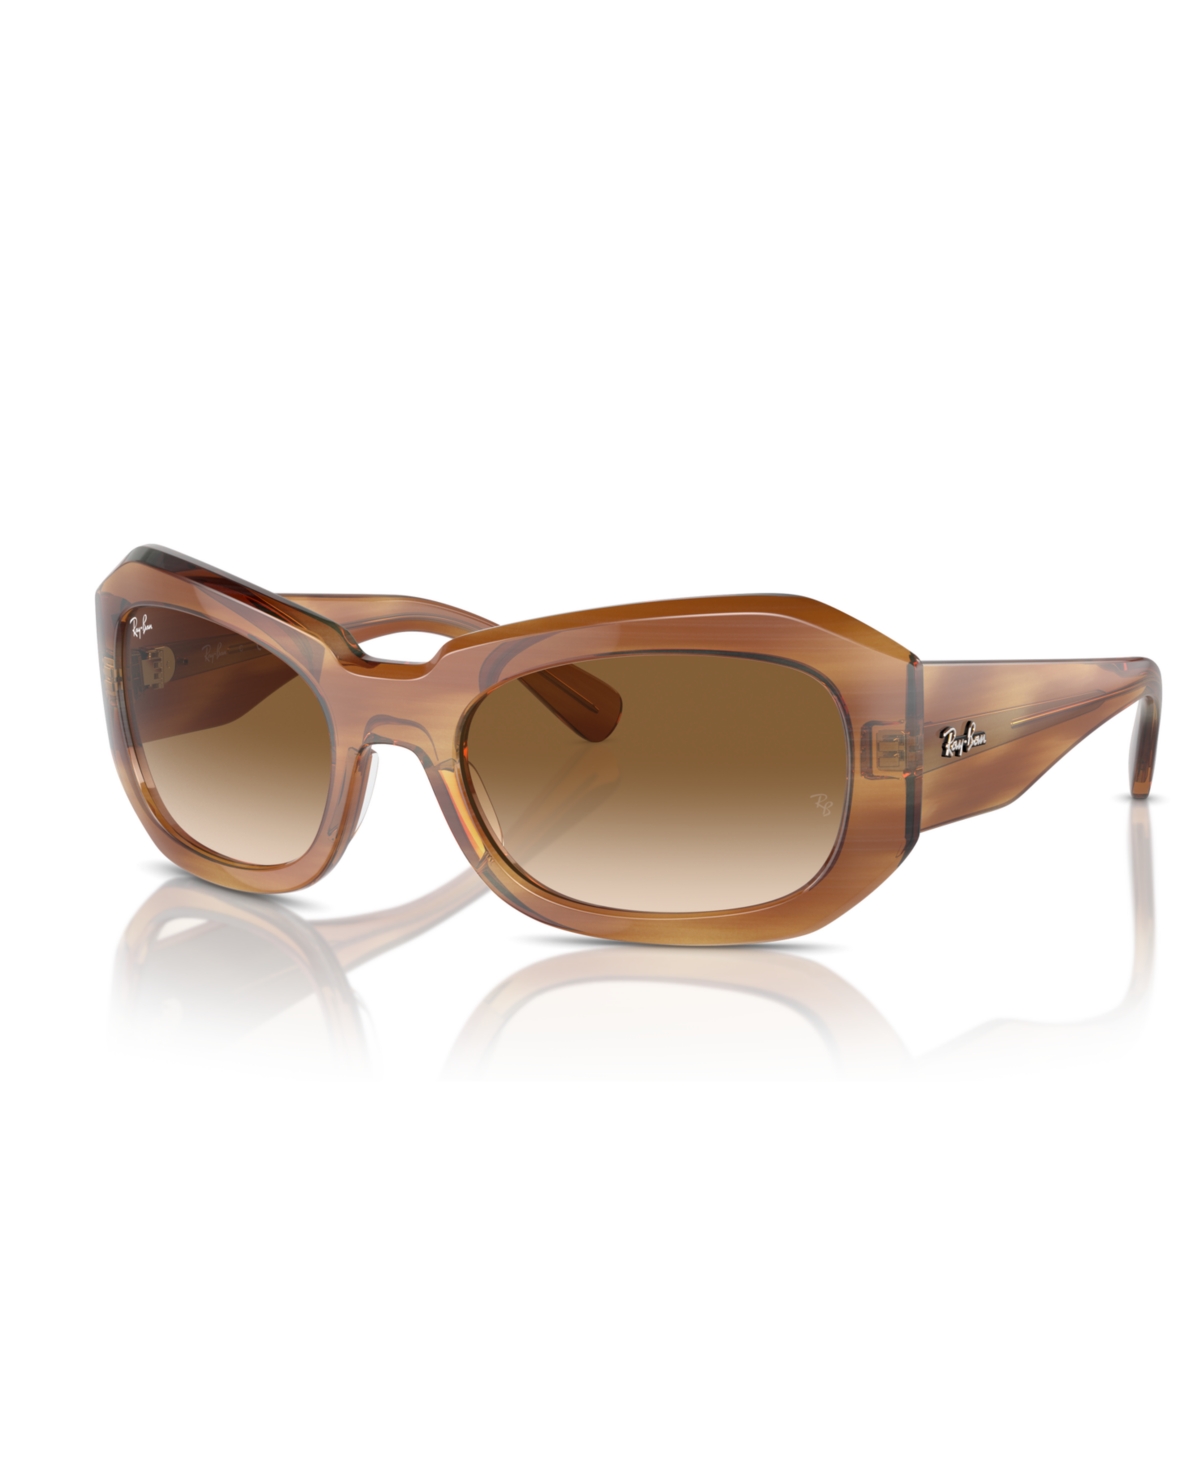 Unisex Sunglasses, Beate Rb2212 - Striped Brown